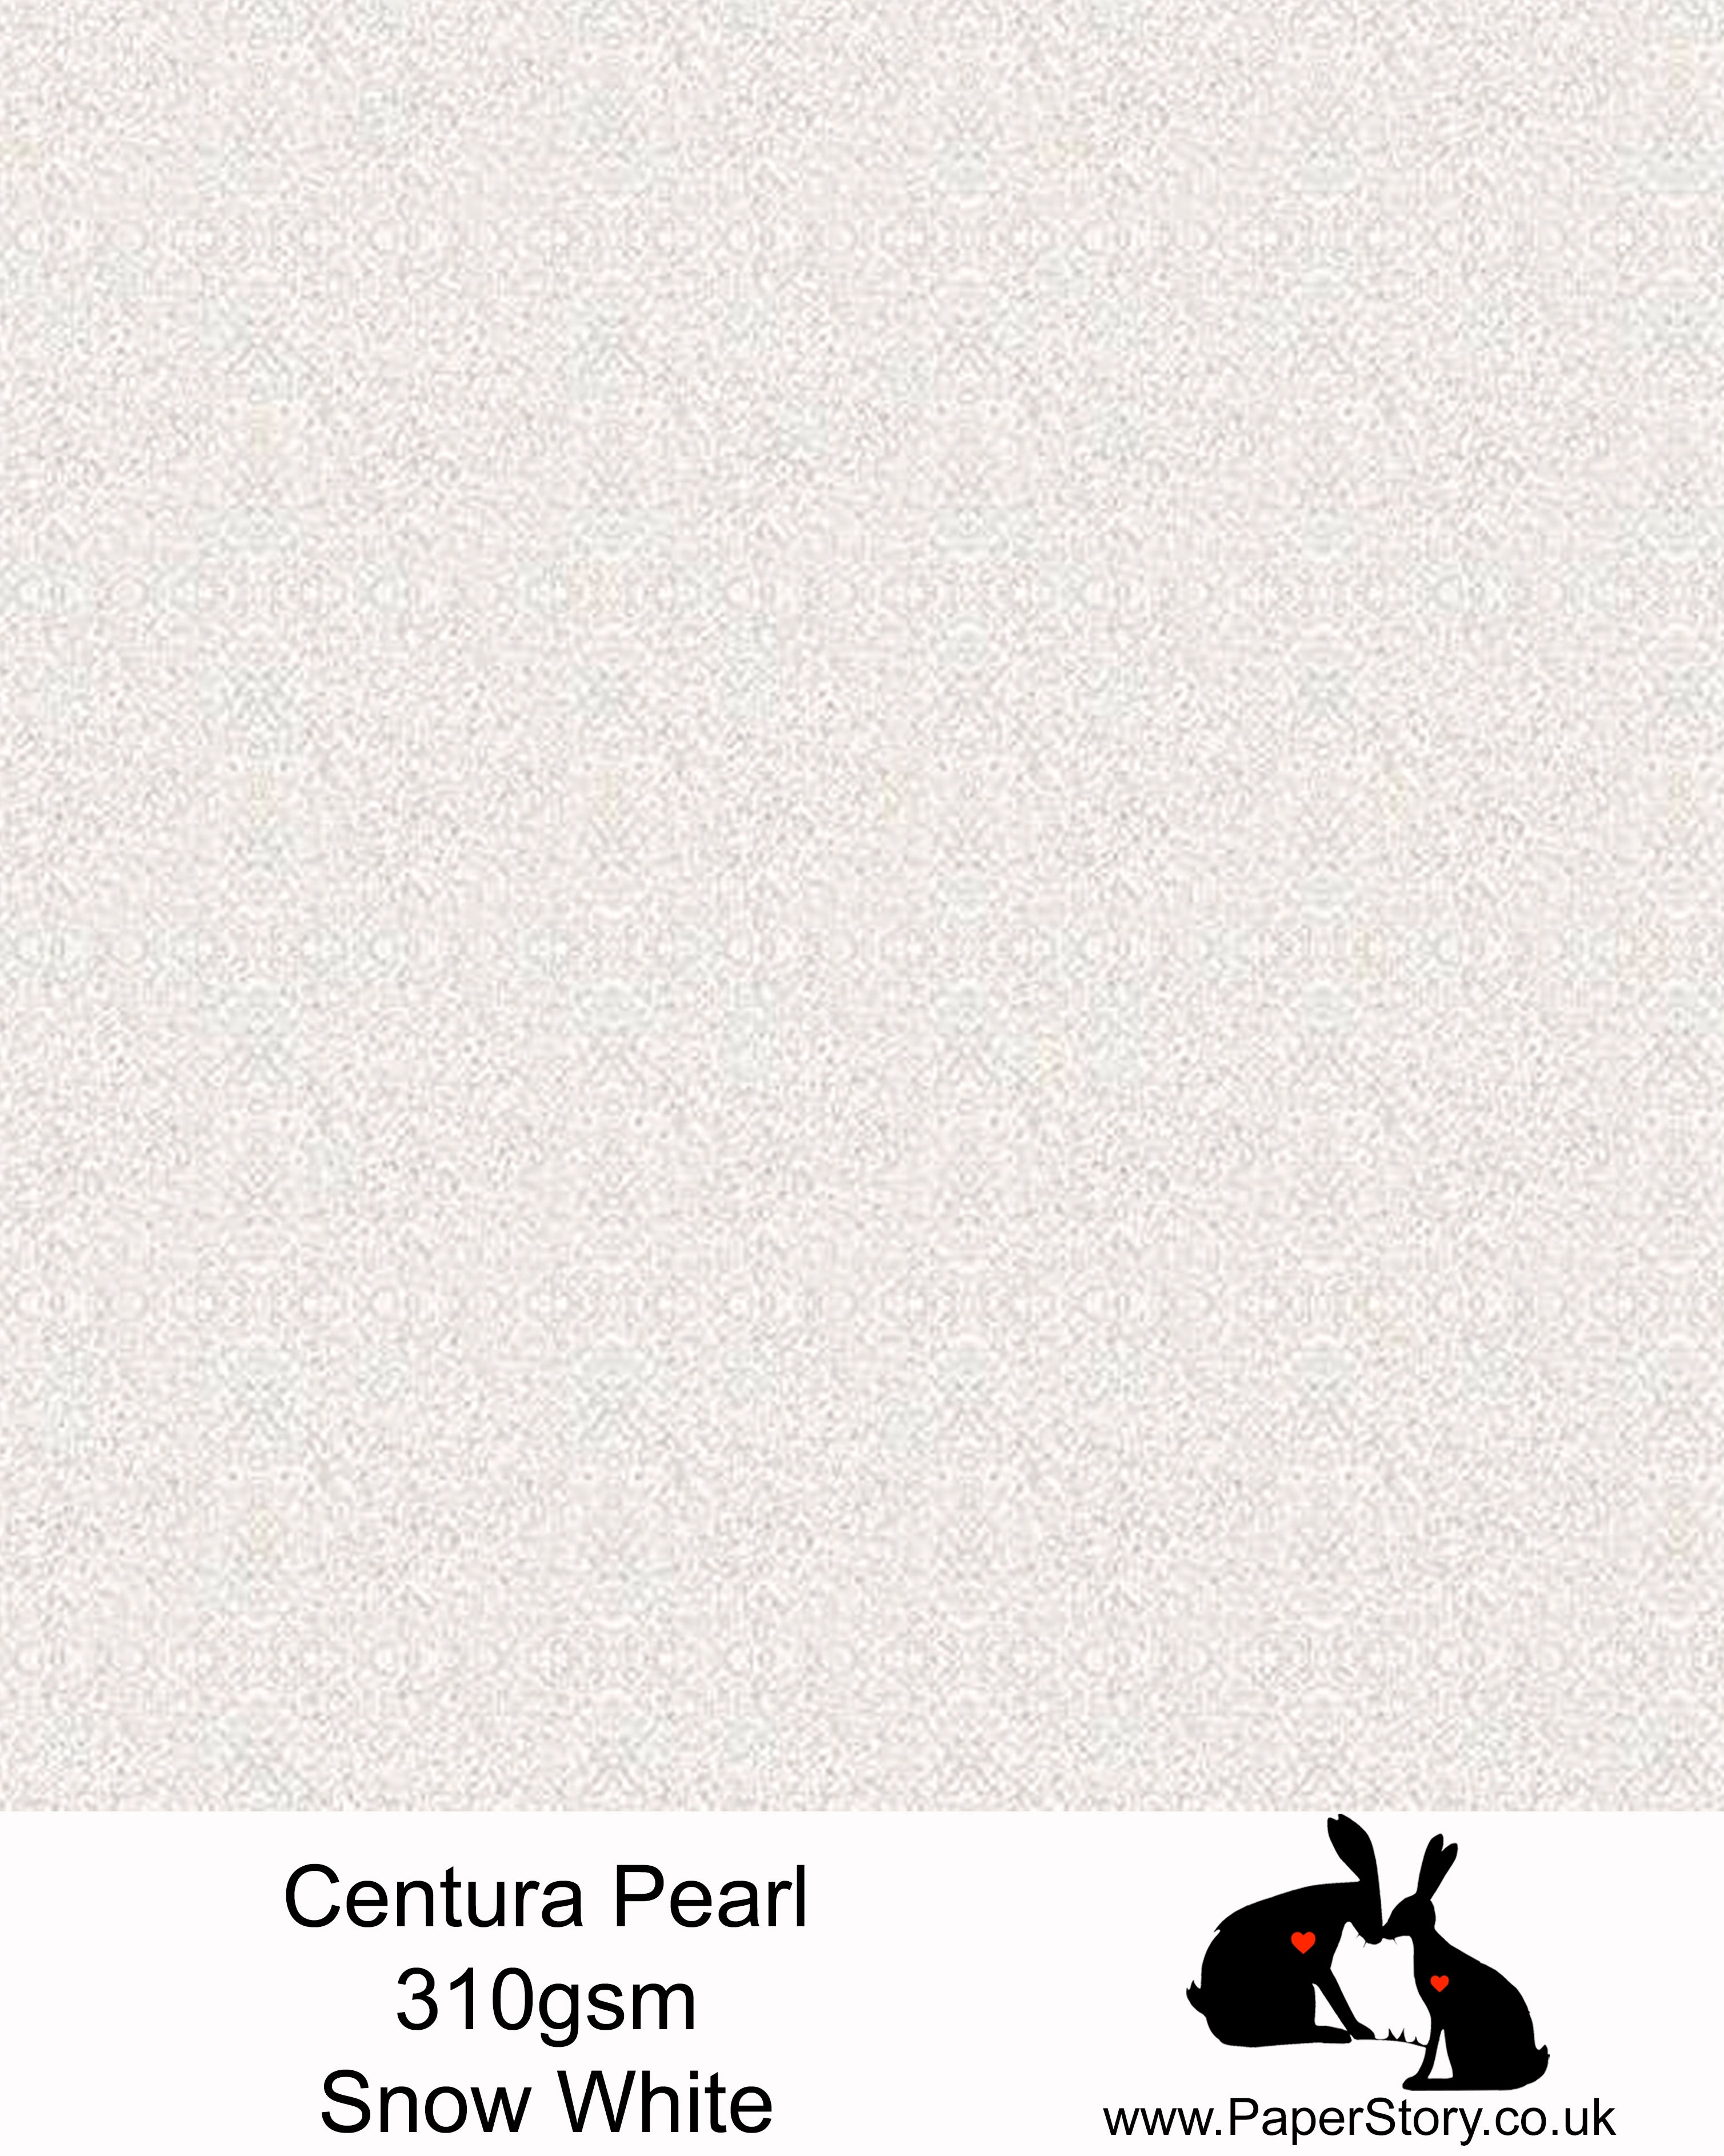 Centura Pearl single sided card 310 gsm. Snow white, is a bright white with a silver shimmer. Pearlescent one side, white printable surface on the other. High-quality Pearlescent card made in the UK, perfect for wedding cards, greetings cards, boxes and art and craft projects.